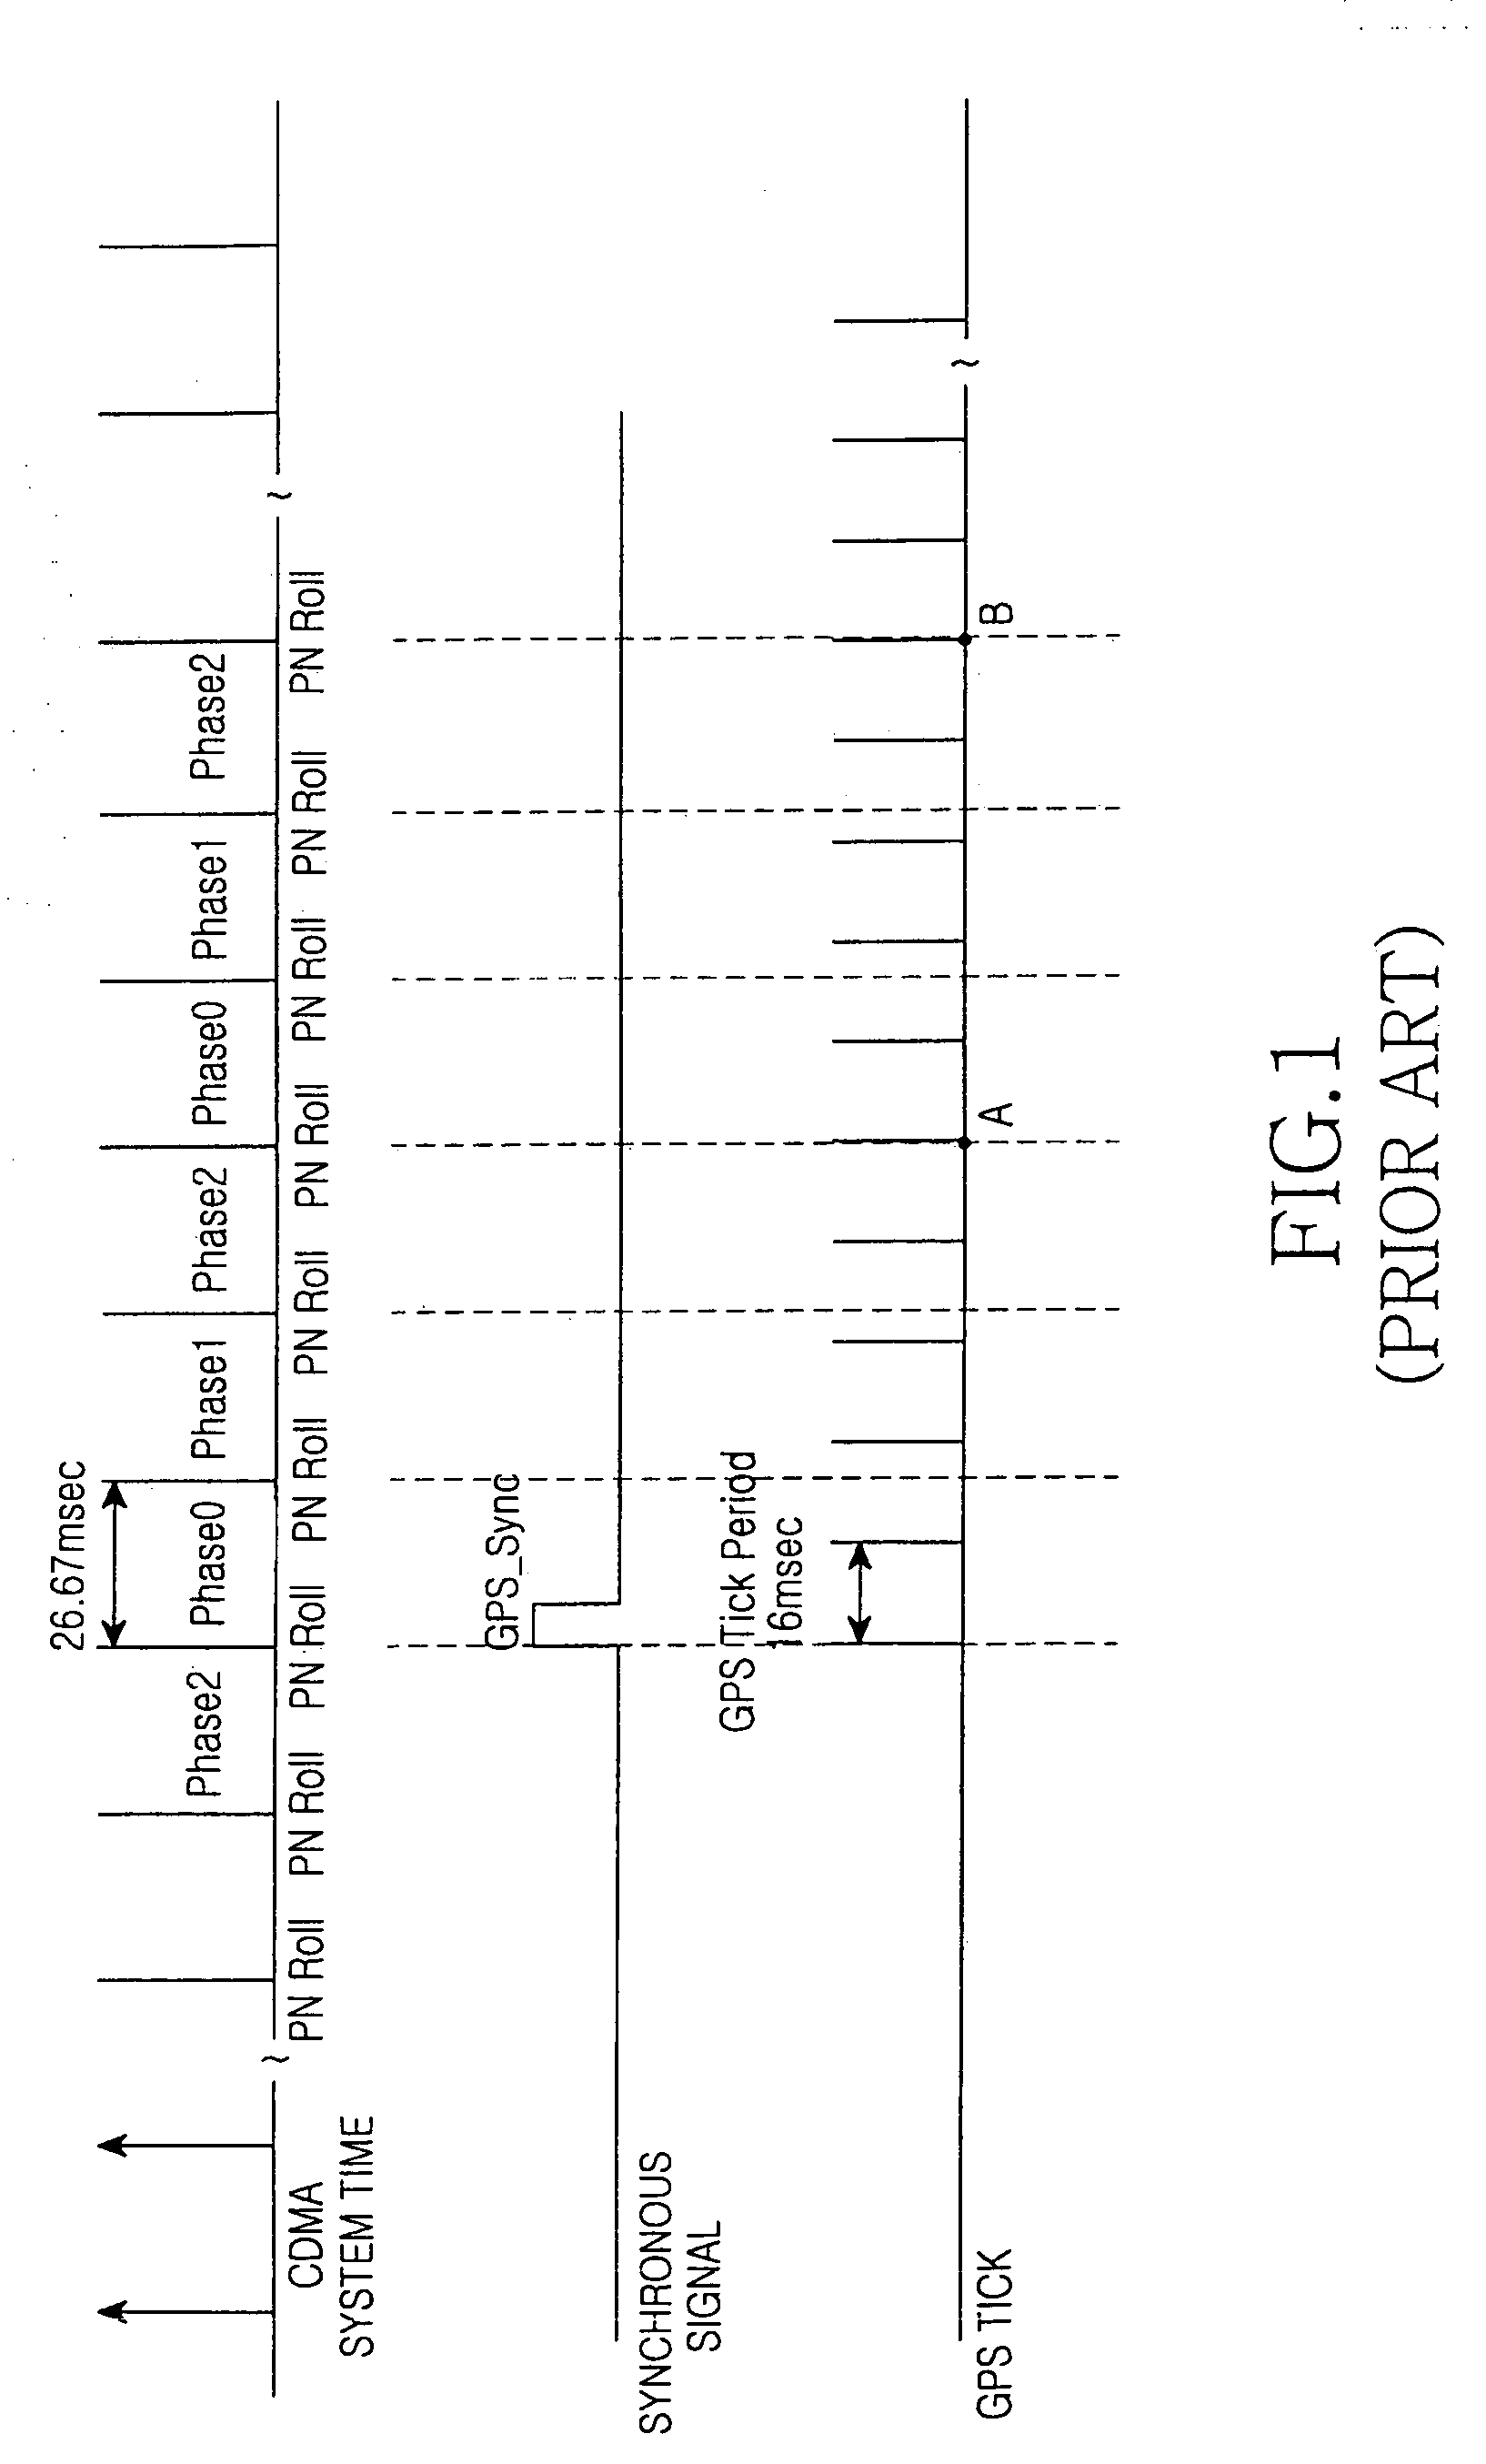 AGPS module time synchronization method and device using system time information in mobile terminal